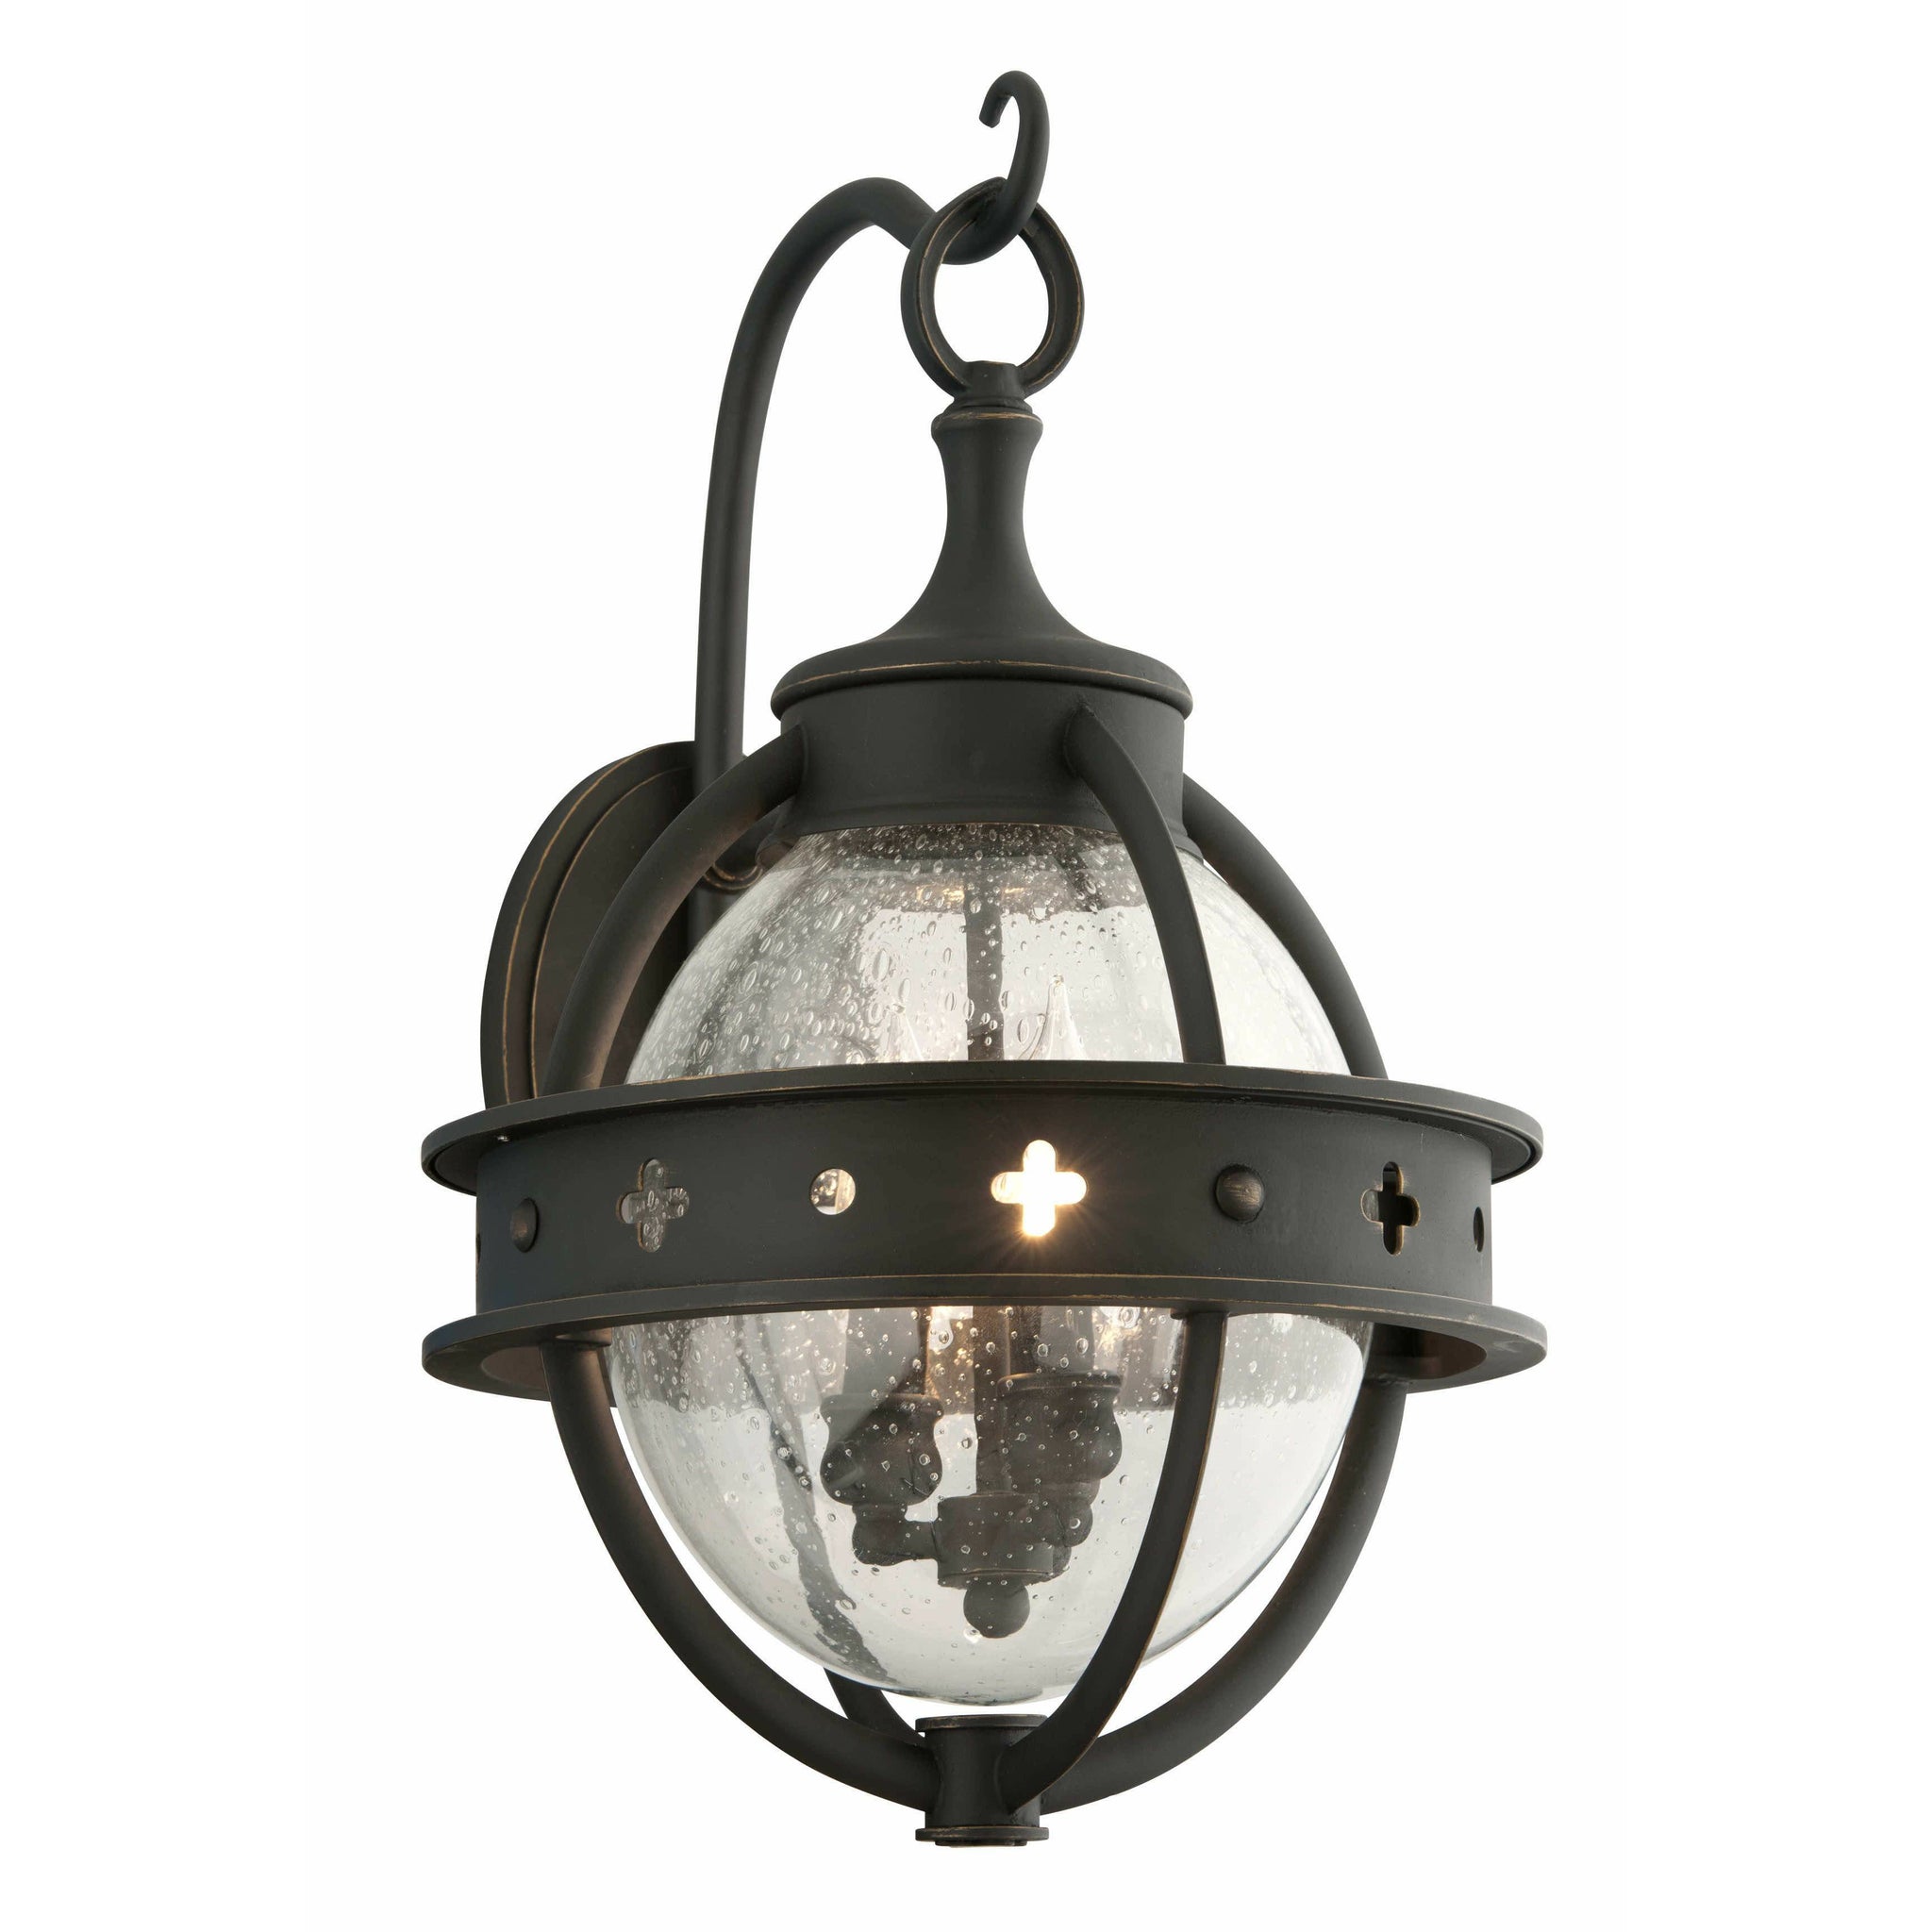 Mendocino Outdoor Wall Light Forged Black